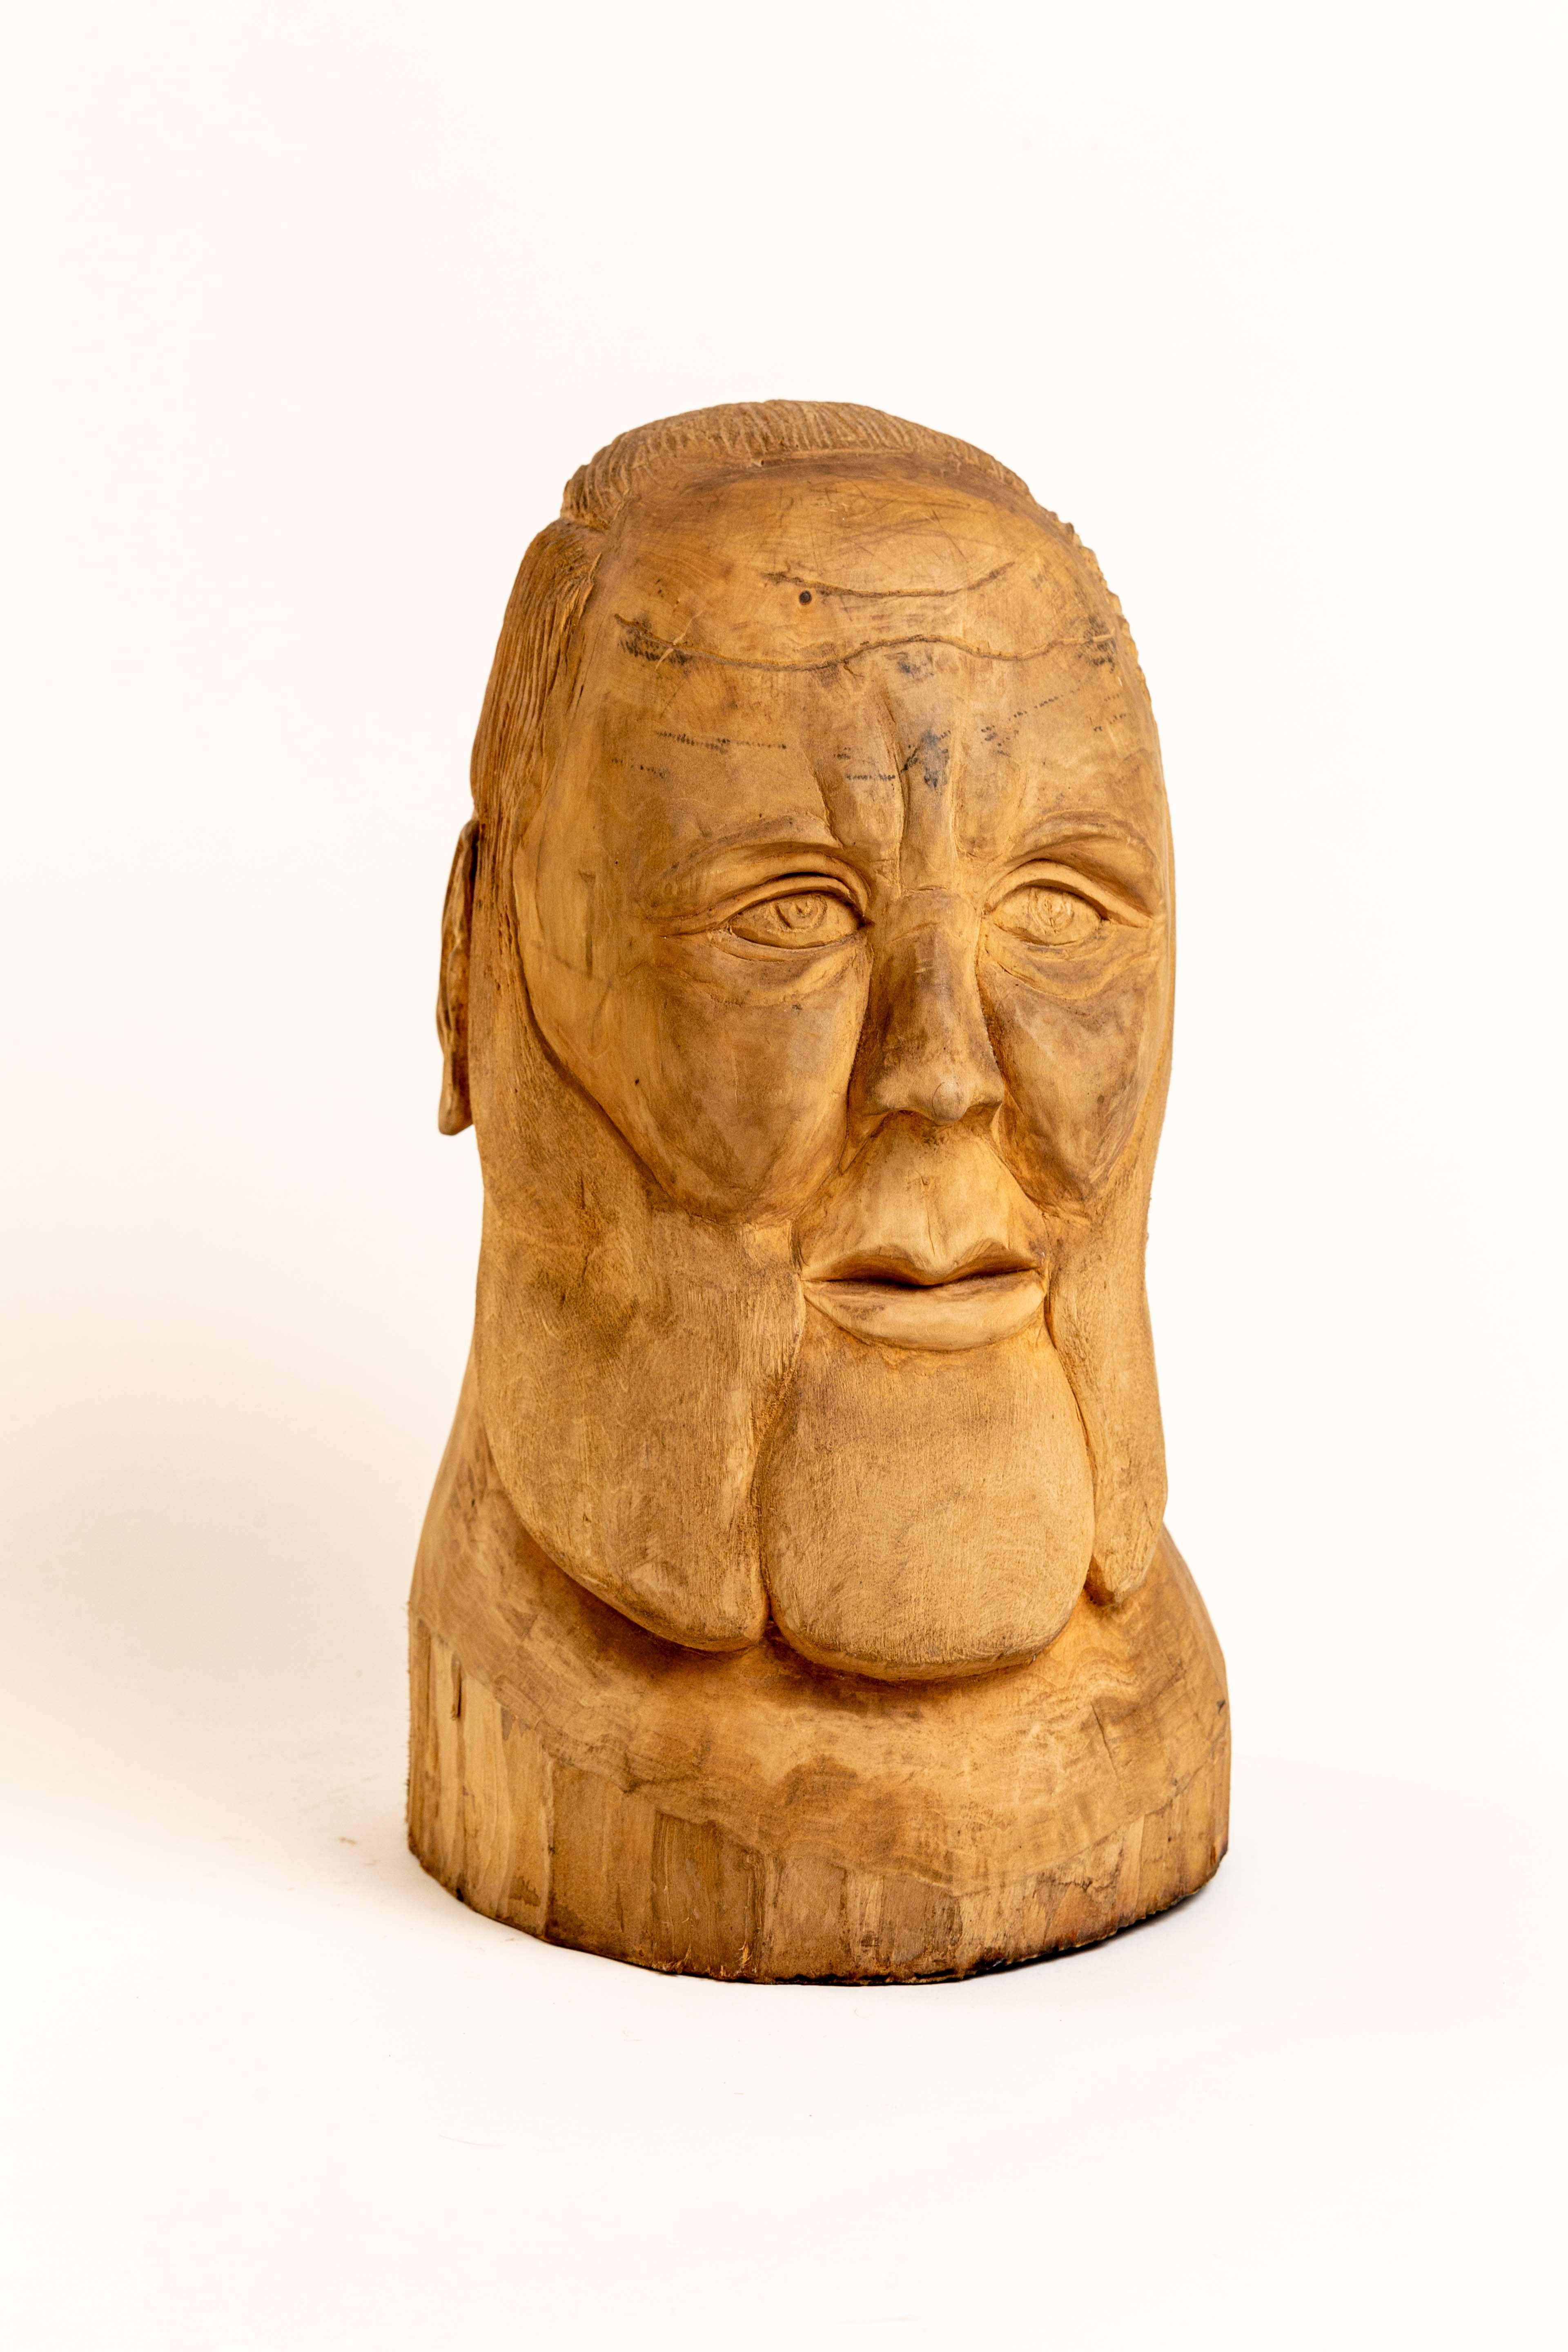 This distinguished and very plump fellow has a regal face with large jowls, smooth skin and a wonderful patina. This remarkable work was hand carved from one solid piece of wood. Sculpture is unsigned, but was purchased along with two other Duane